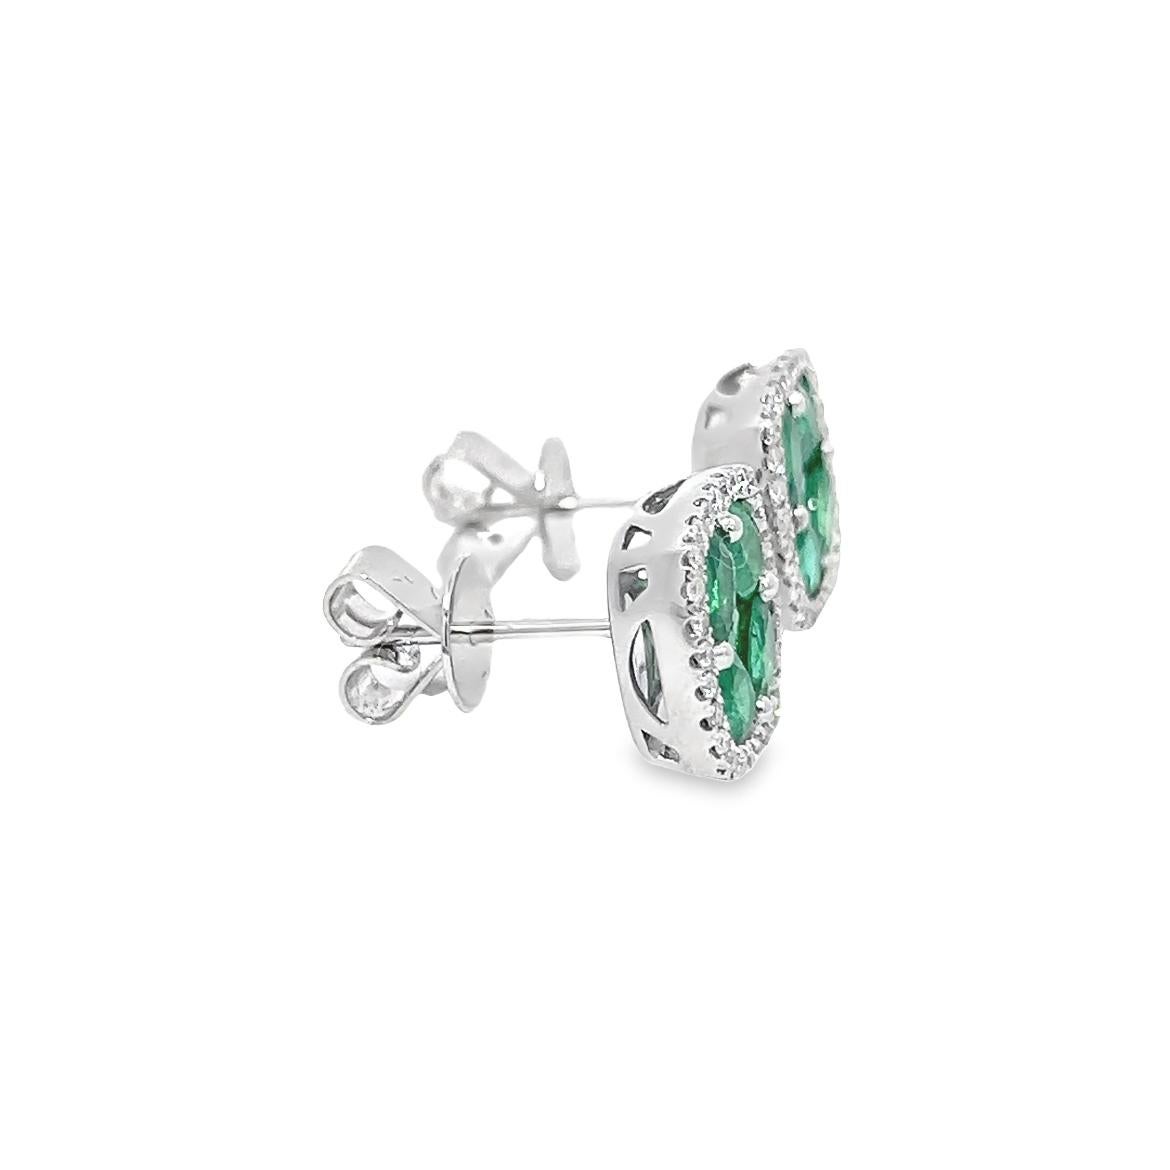 2.04CT Total Weight Emeralds & Diamonds Flower Shape Earrings in 18K White Gold In New Condition For Sale In New York, NY